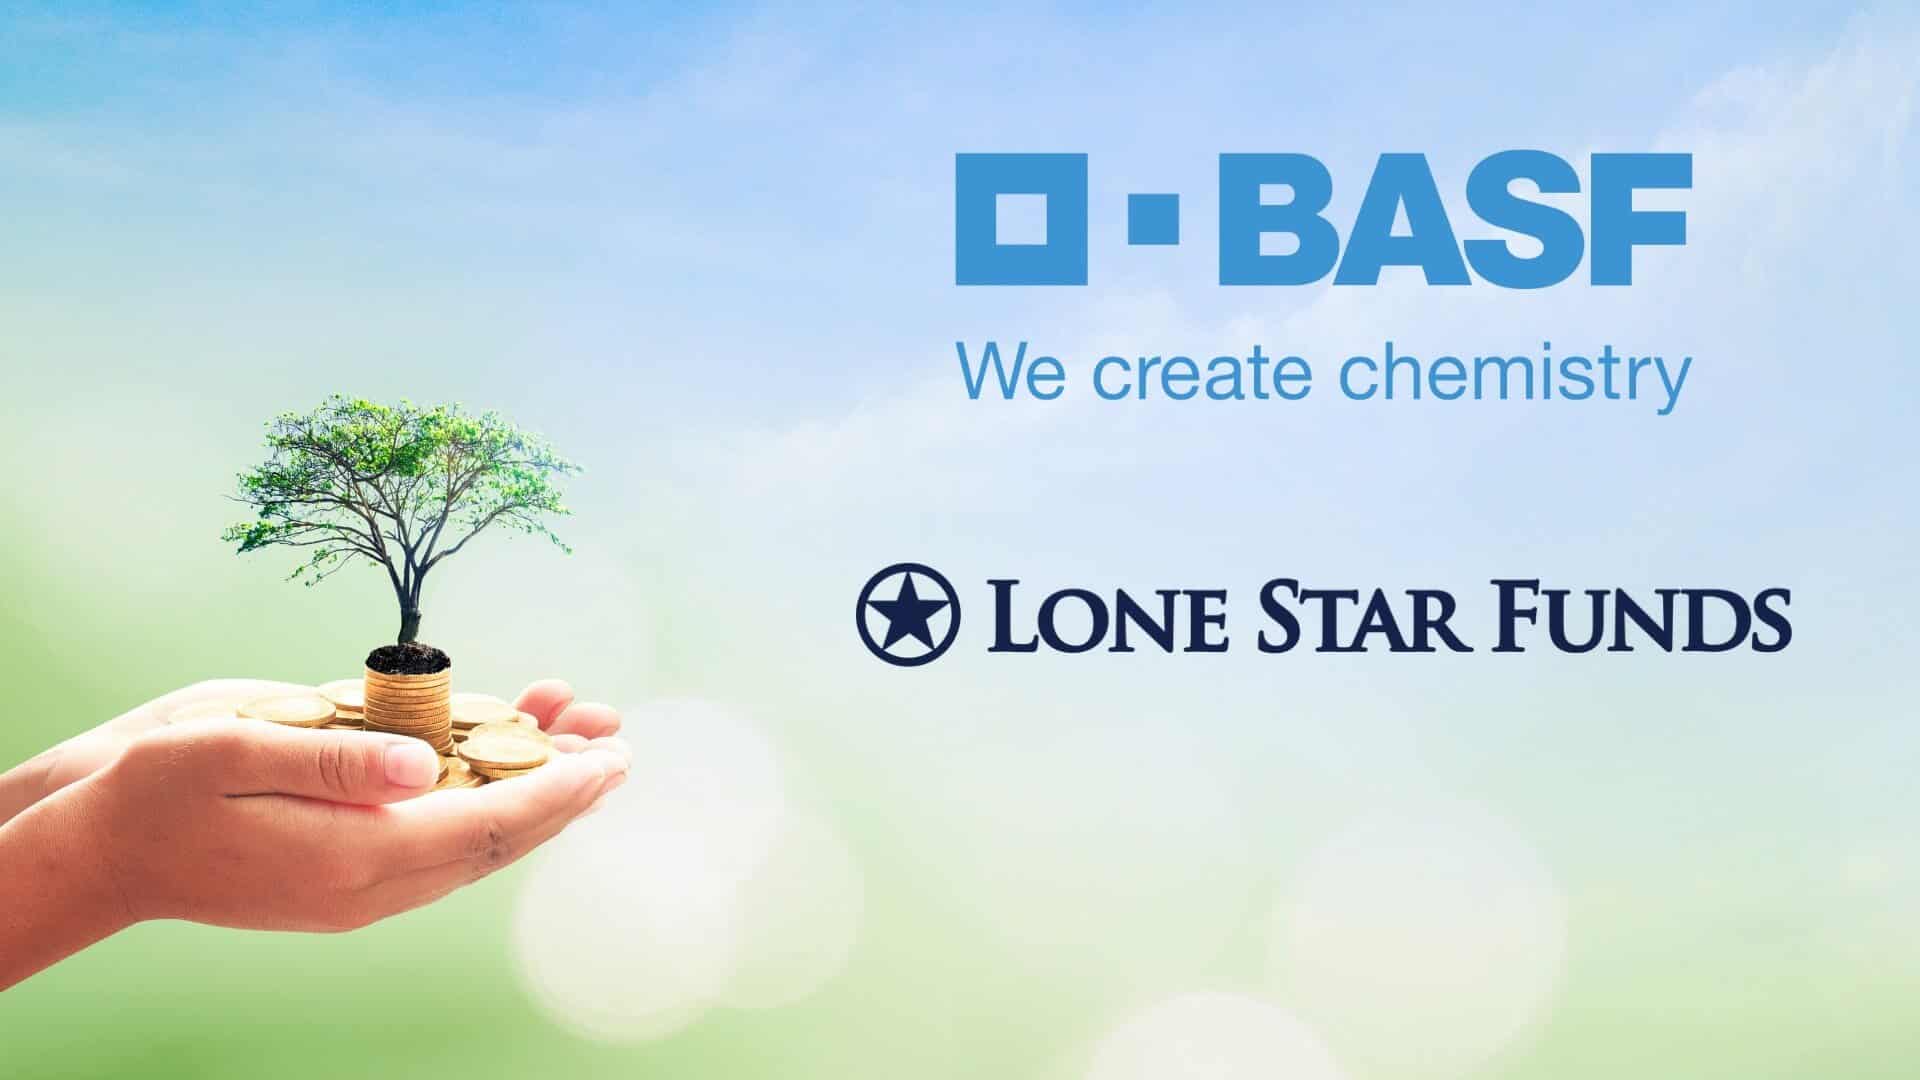 BASF to Sell Construction Chemicals Arm to Global Equity Fund Lone Star